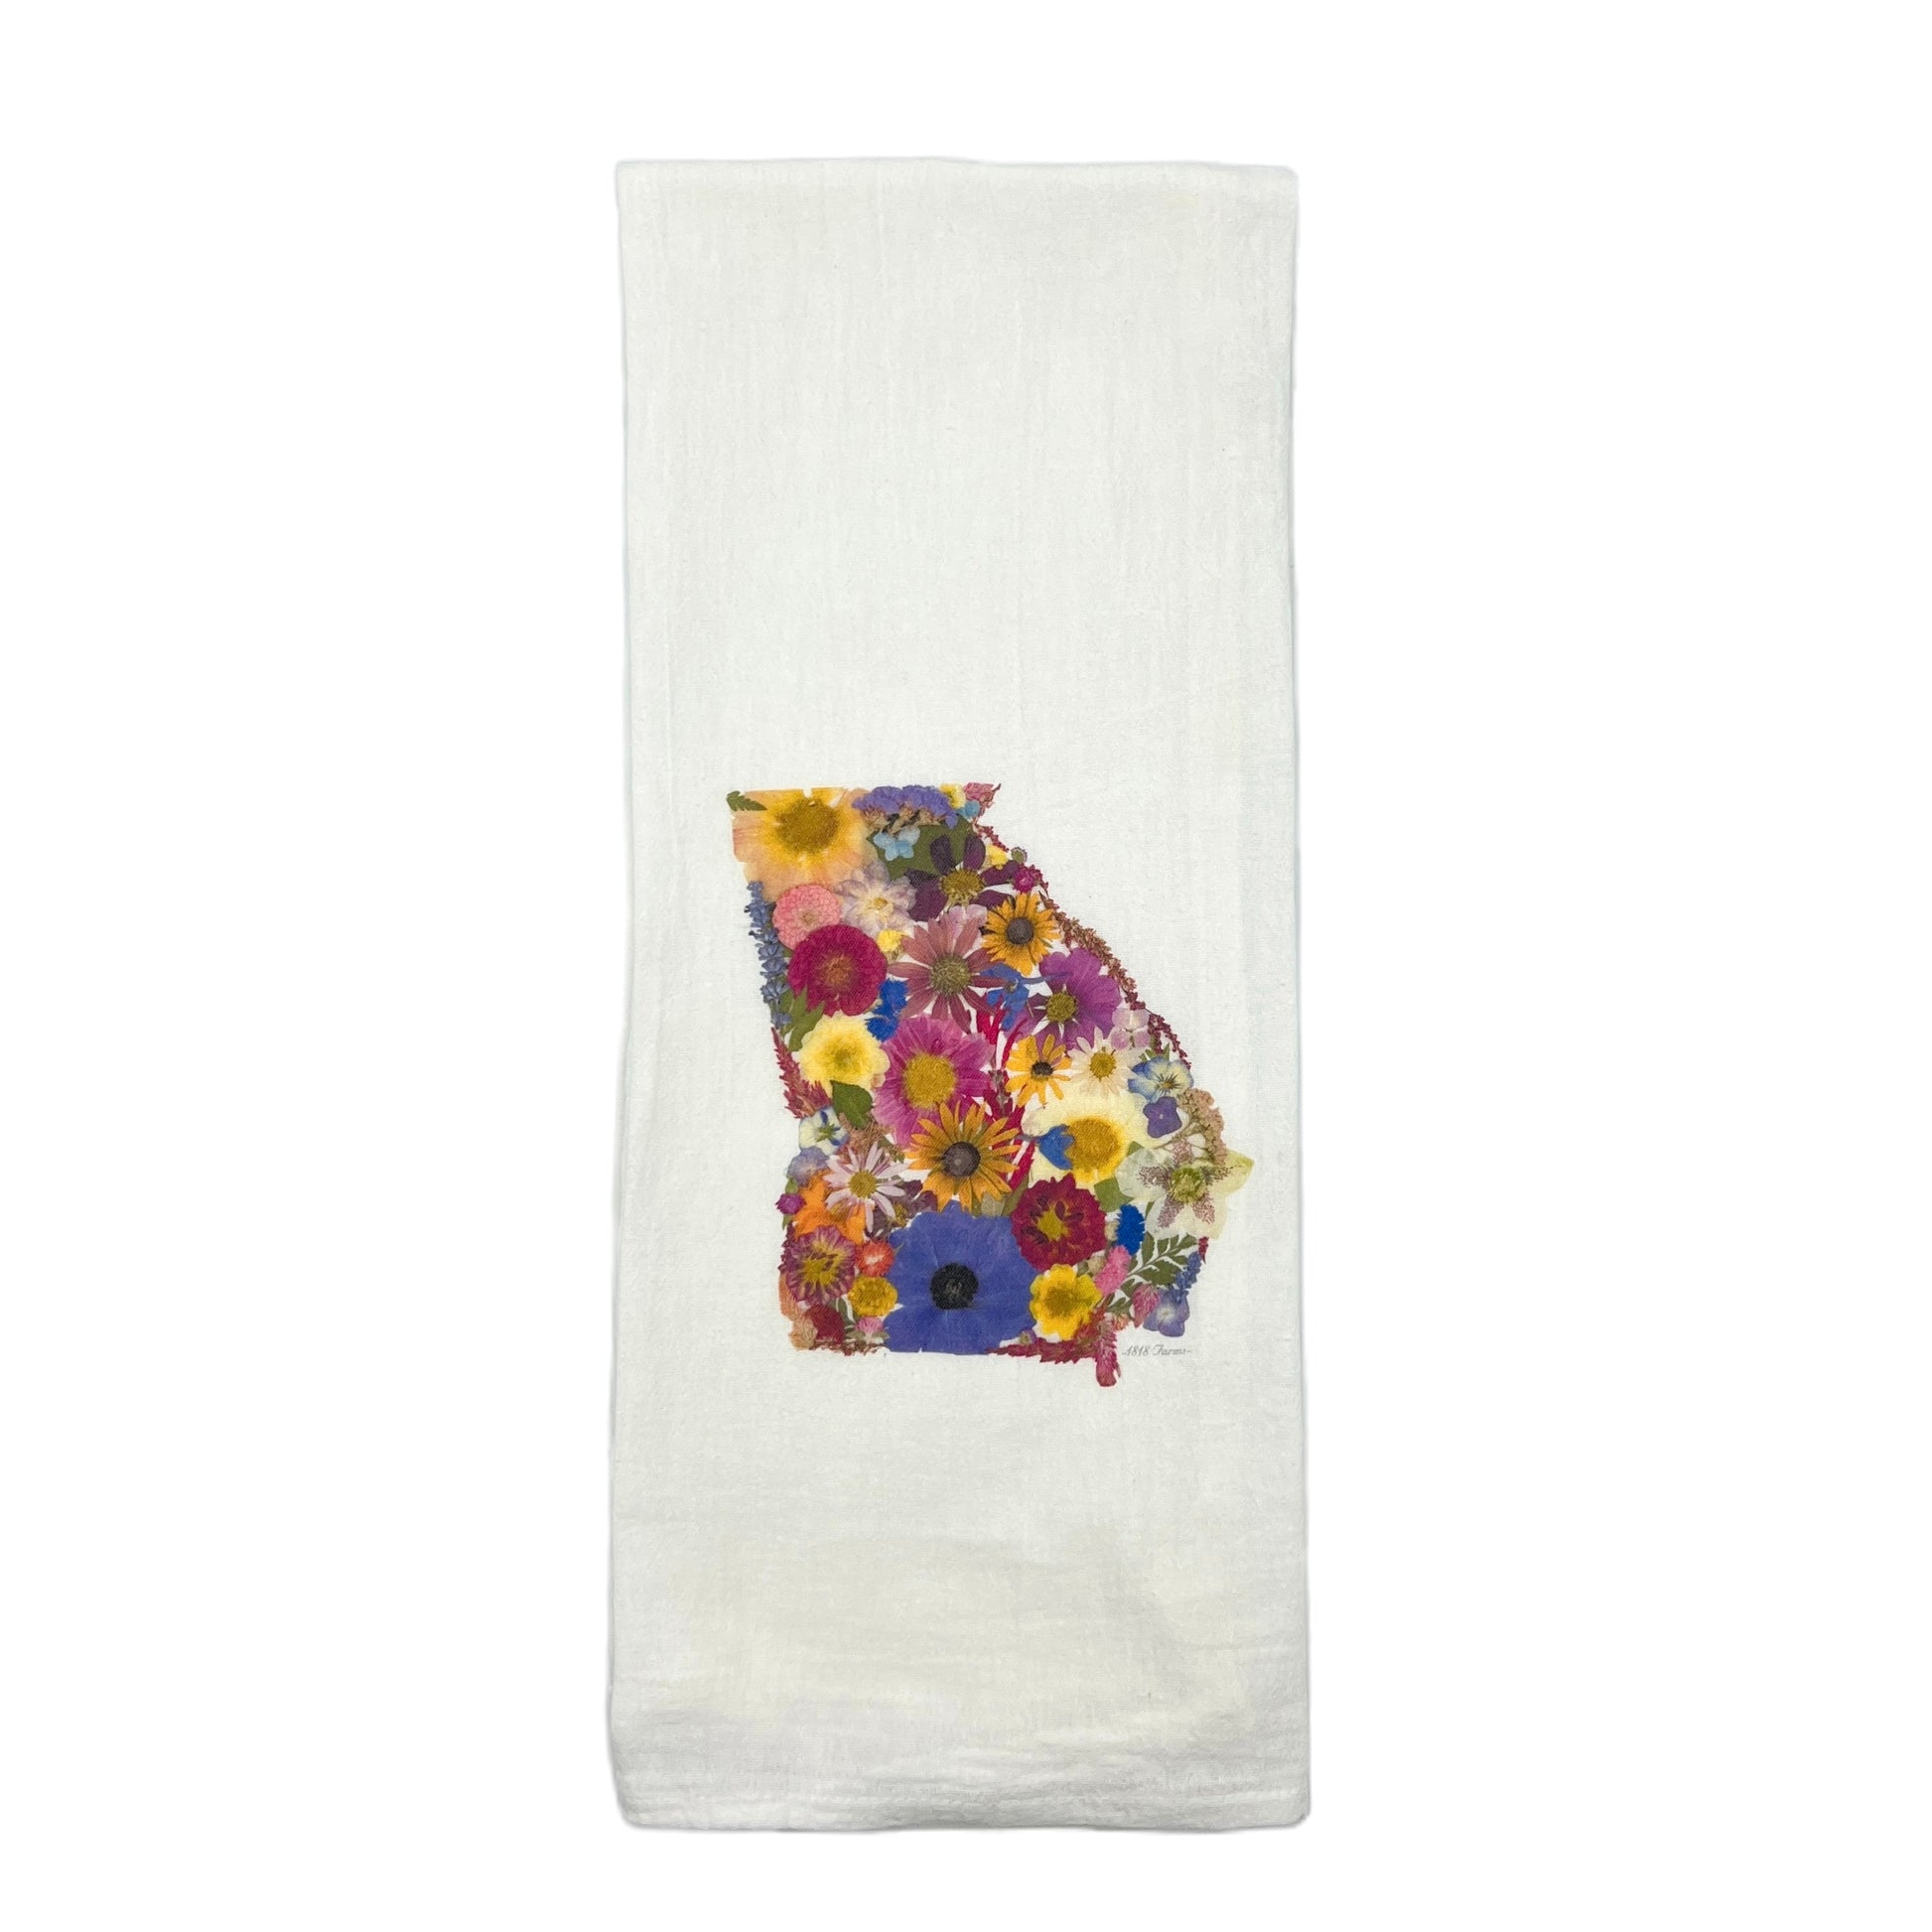 Georgia Themed Flour Sack Towel Featuring Dried, Pressed Flowers - "Where I Bloom" Collection Towel 1818 Farms   